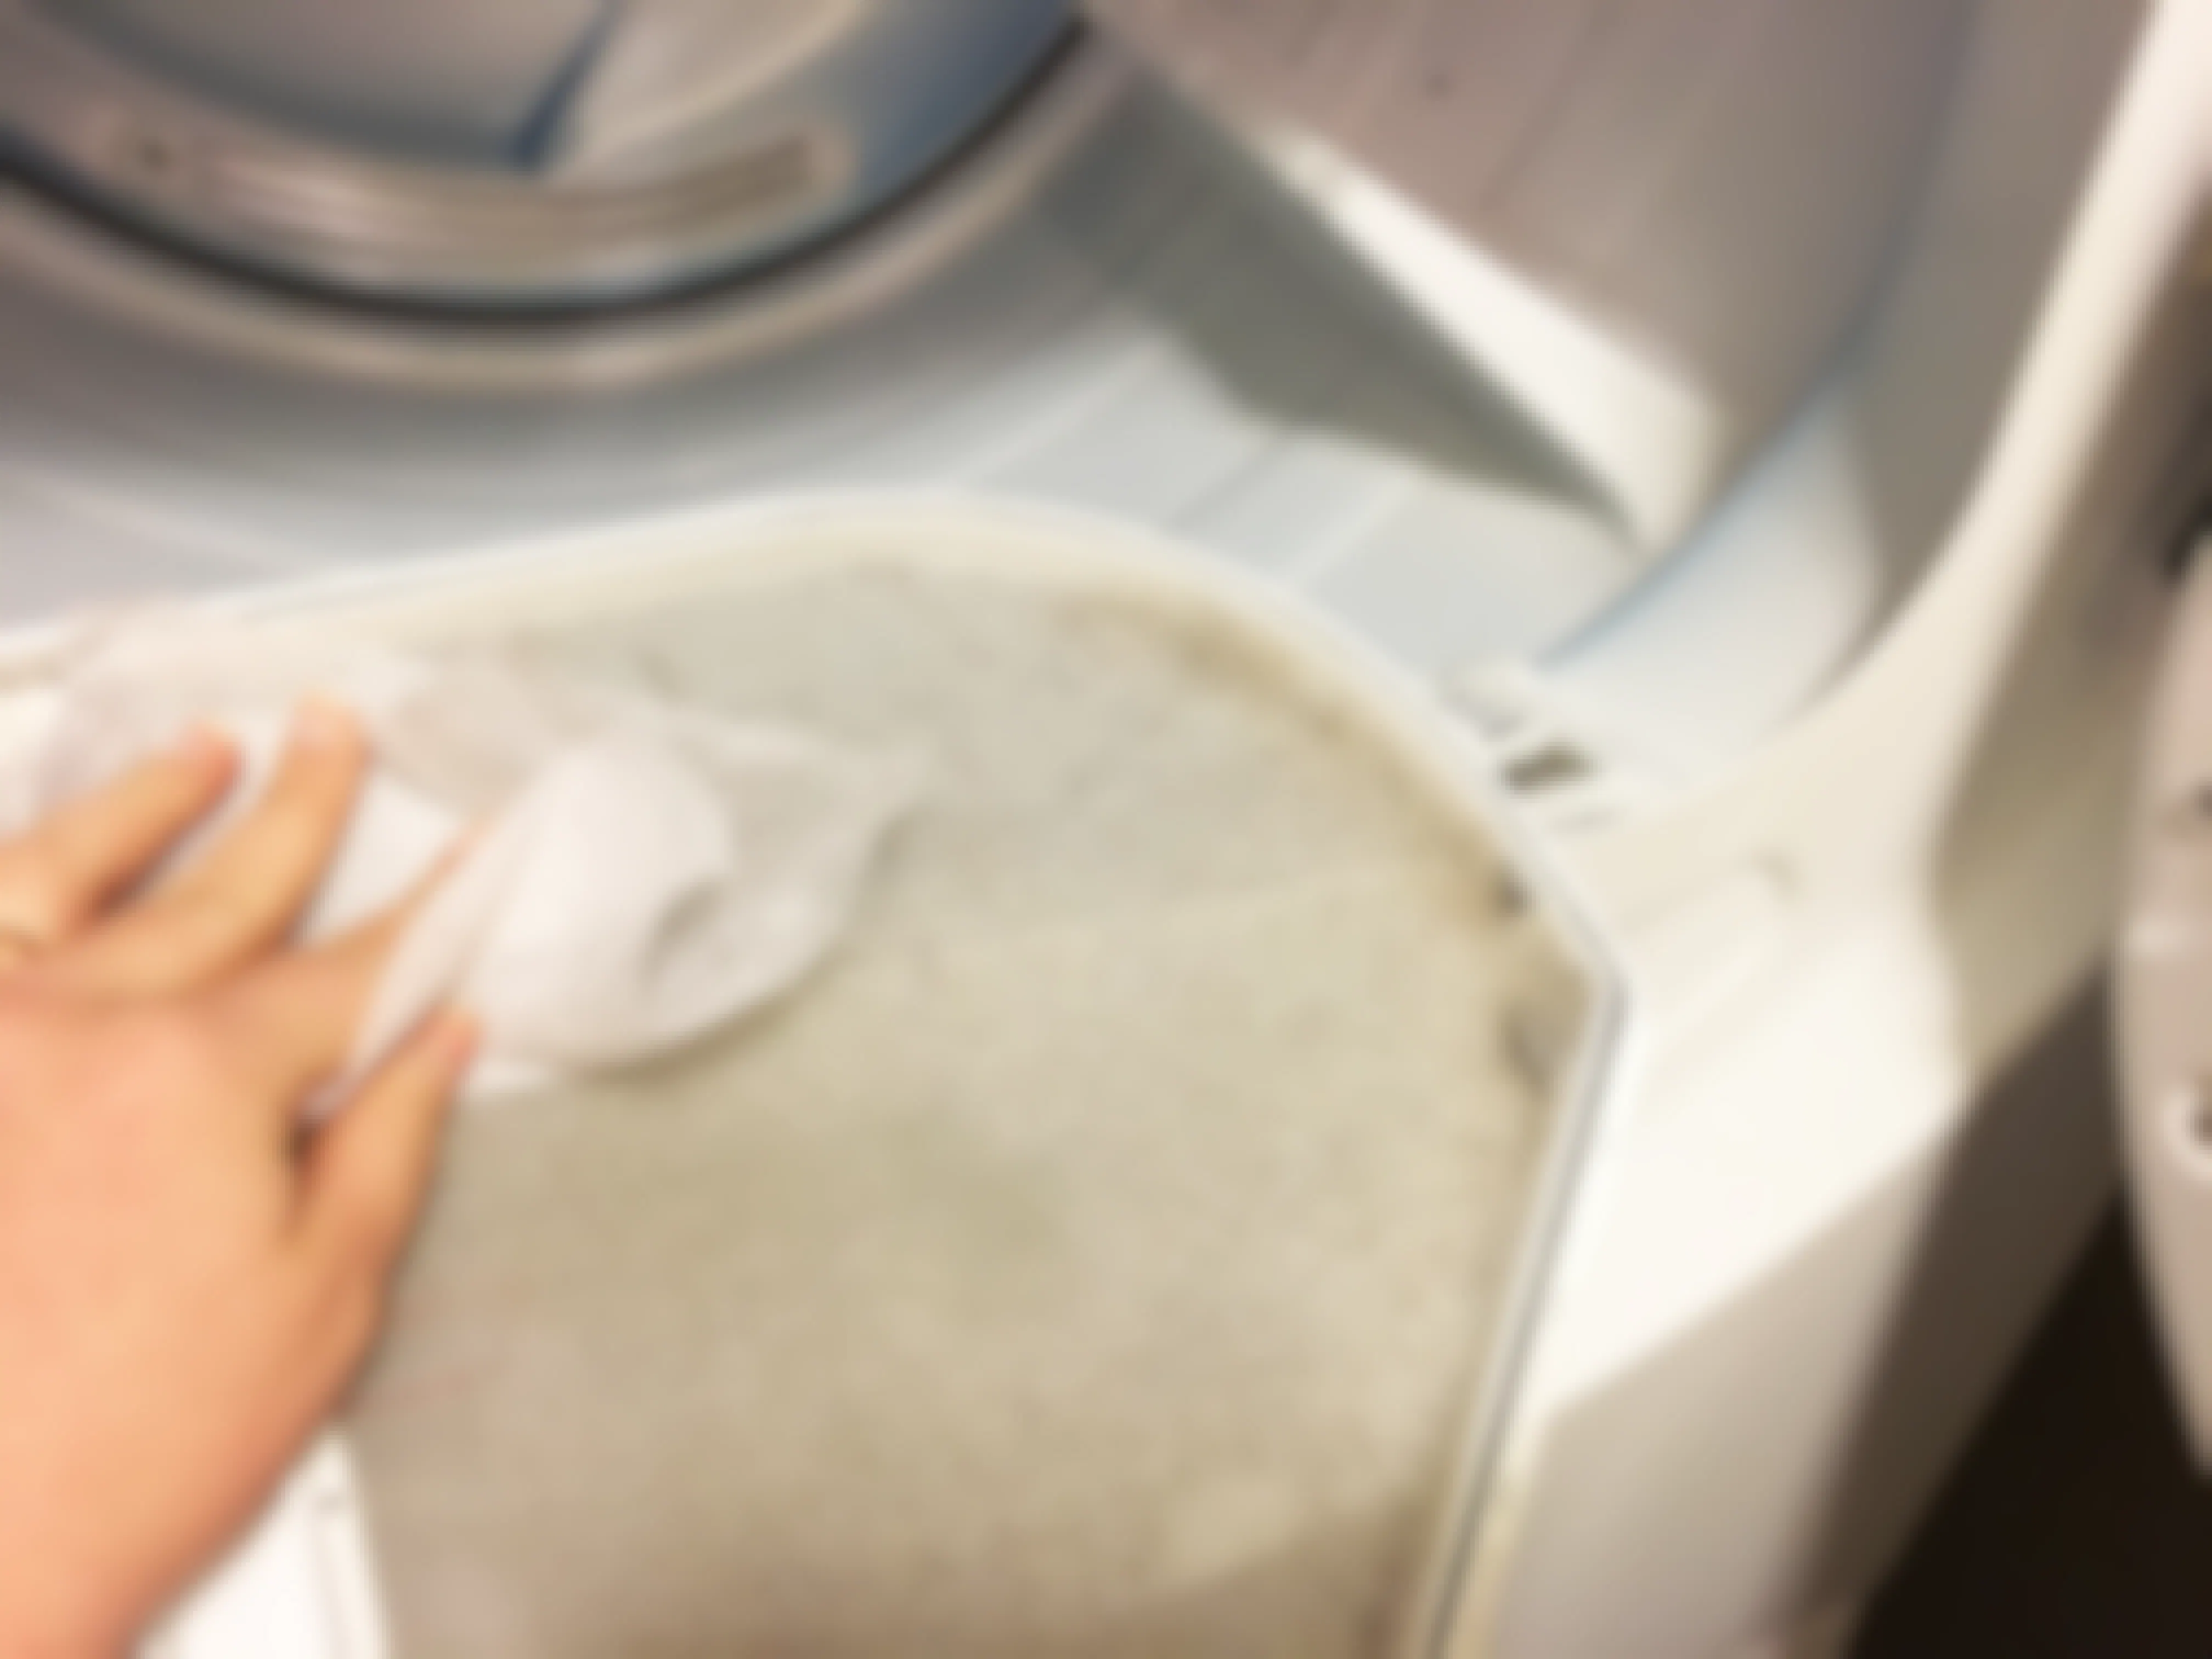 A person wiping out a dryer lint trap with a fabric softener sheet.